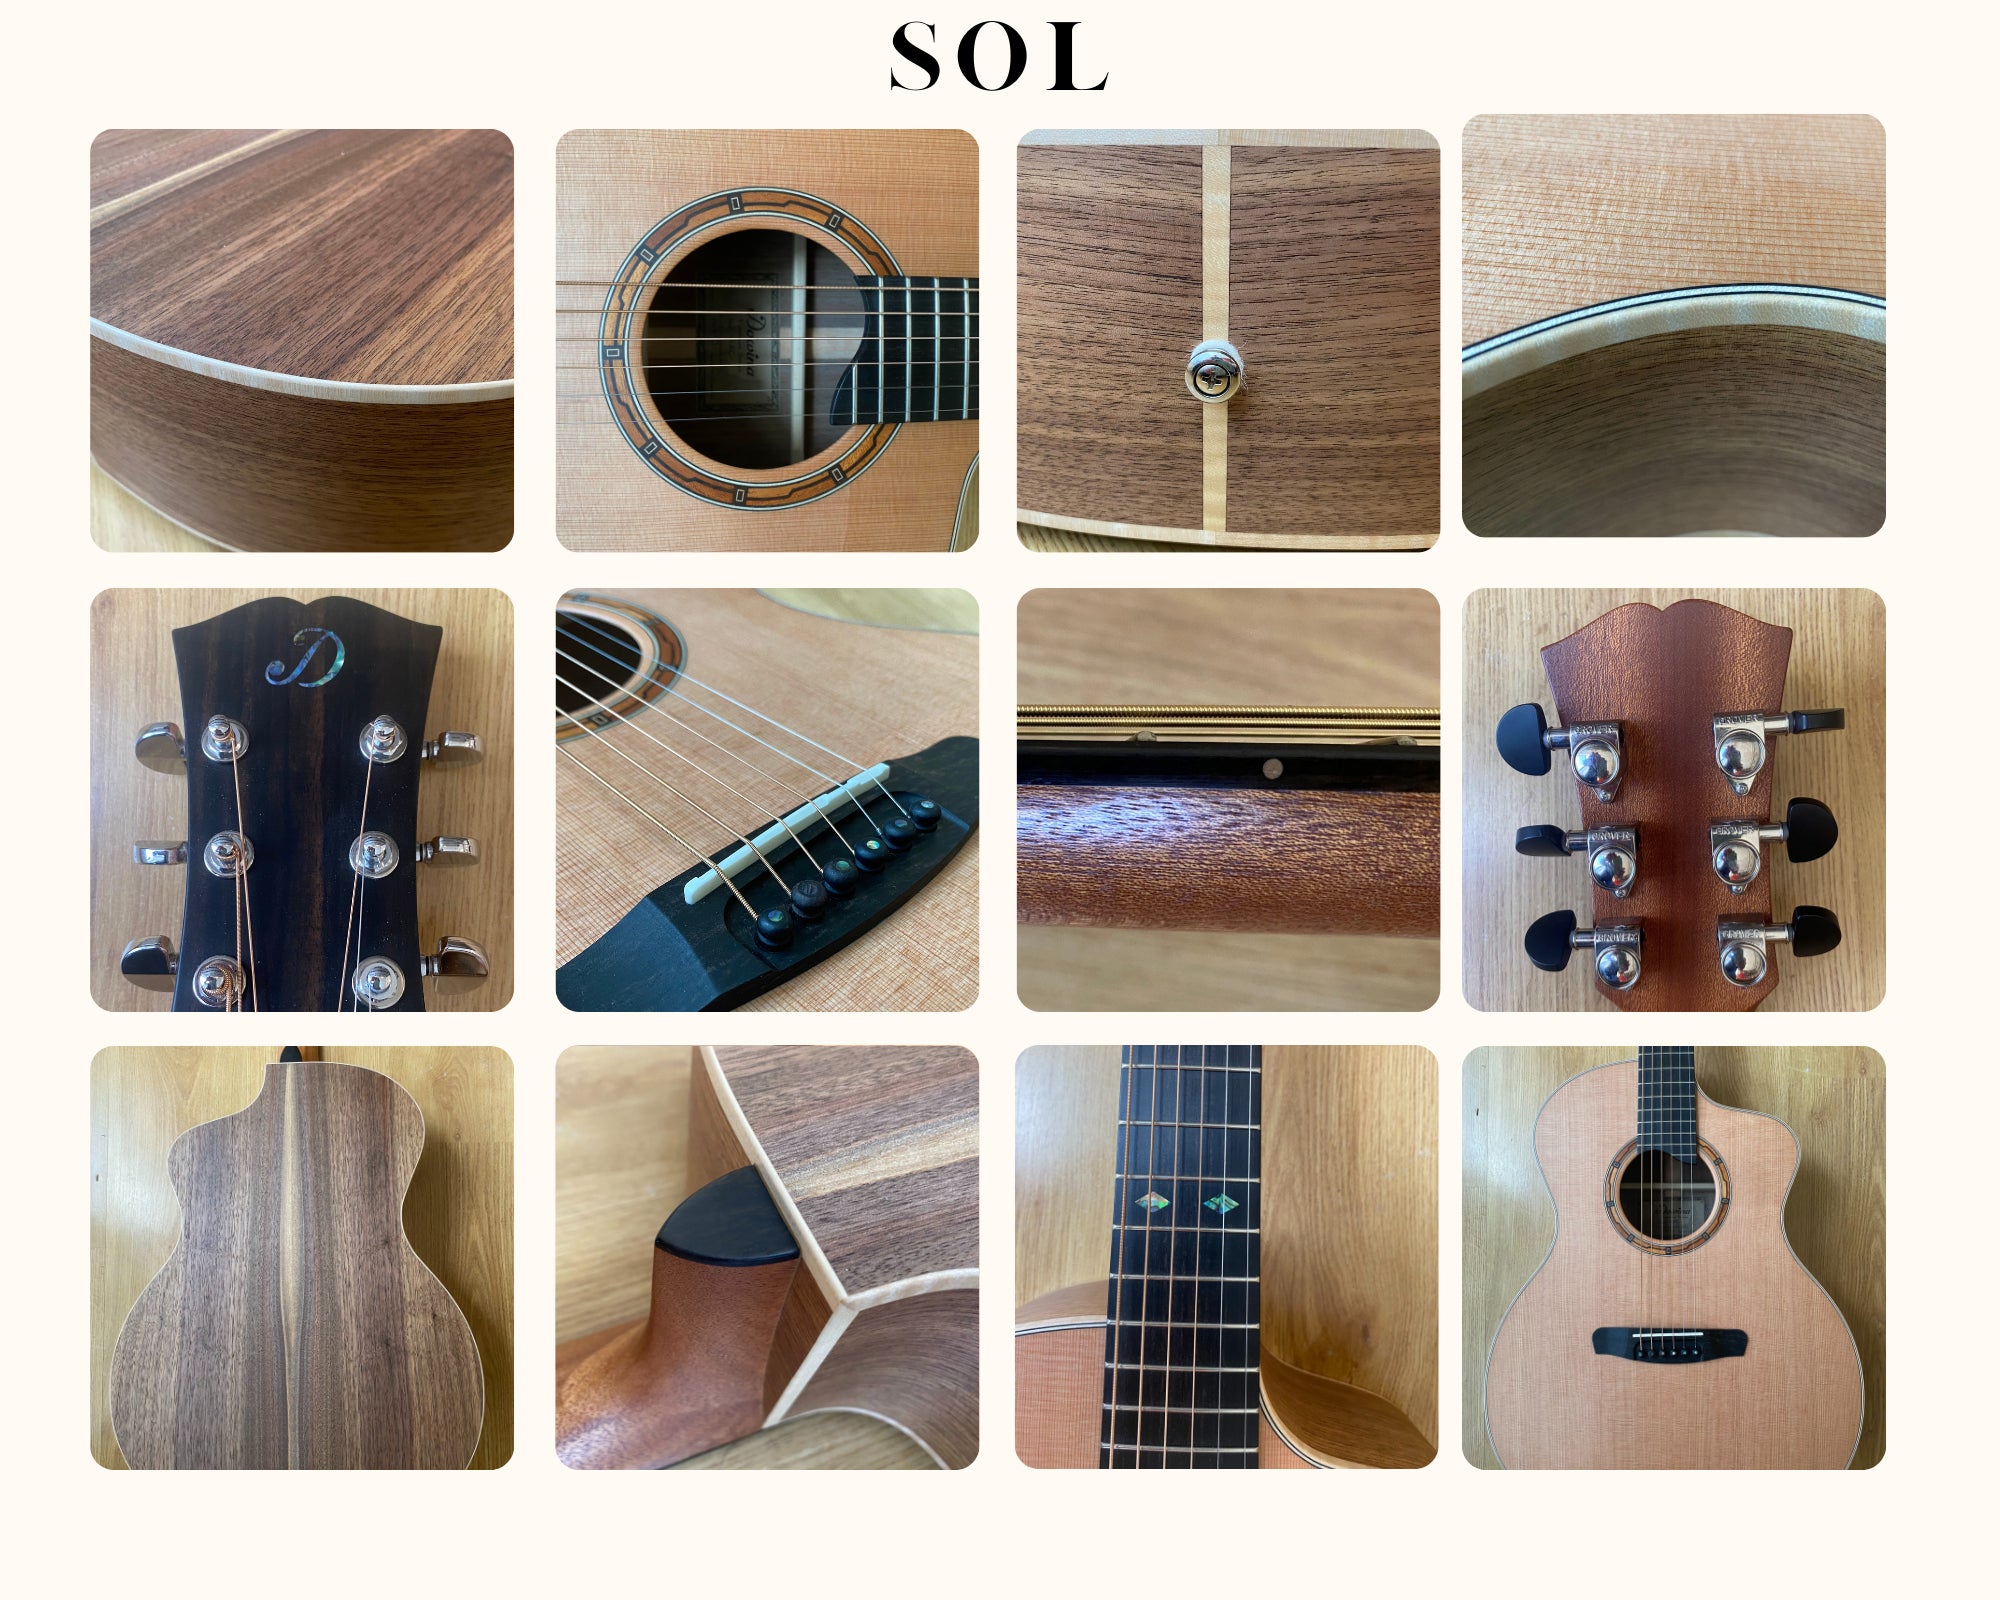 Dowina Walnut (Sol)  BVH-DS, Nylon Strung Guitar for sale at Richards Guitars.